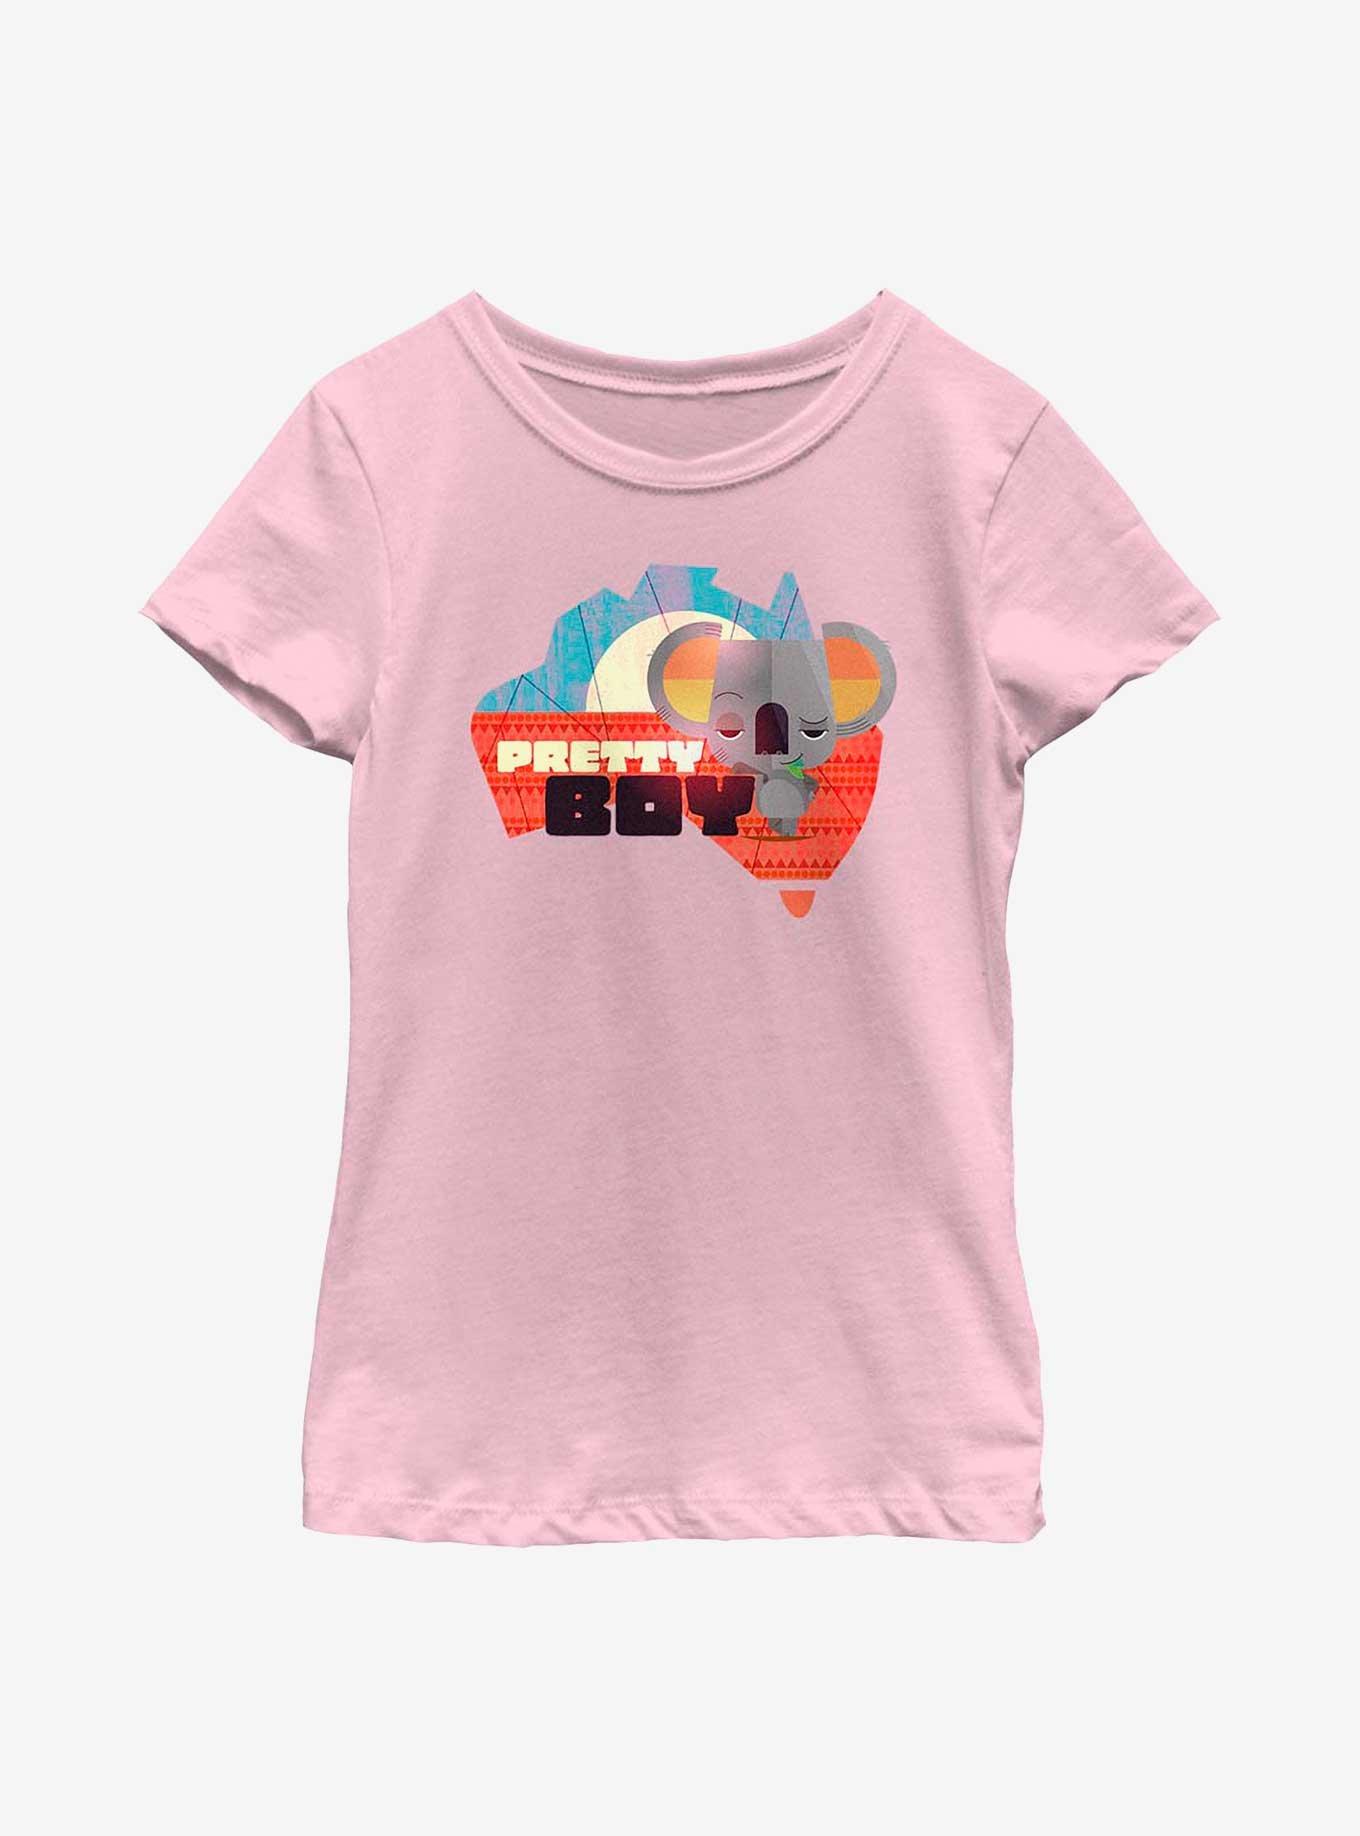 Back To The Outback Pretty Boy Australia Youth Girls T-Shirt, PINK, hi-res